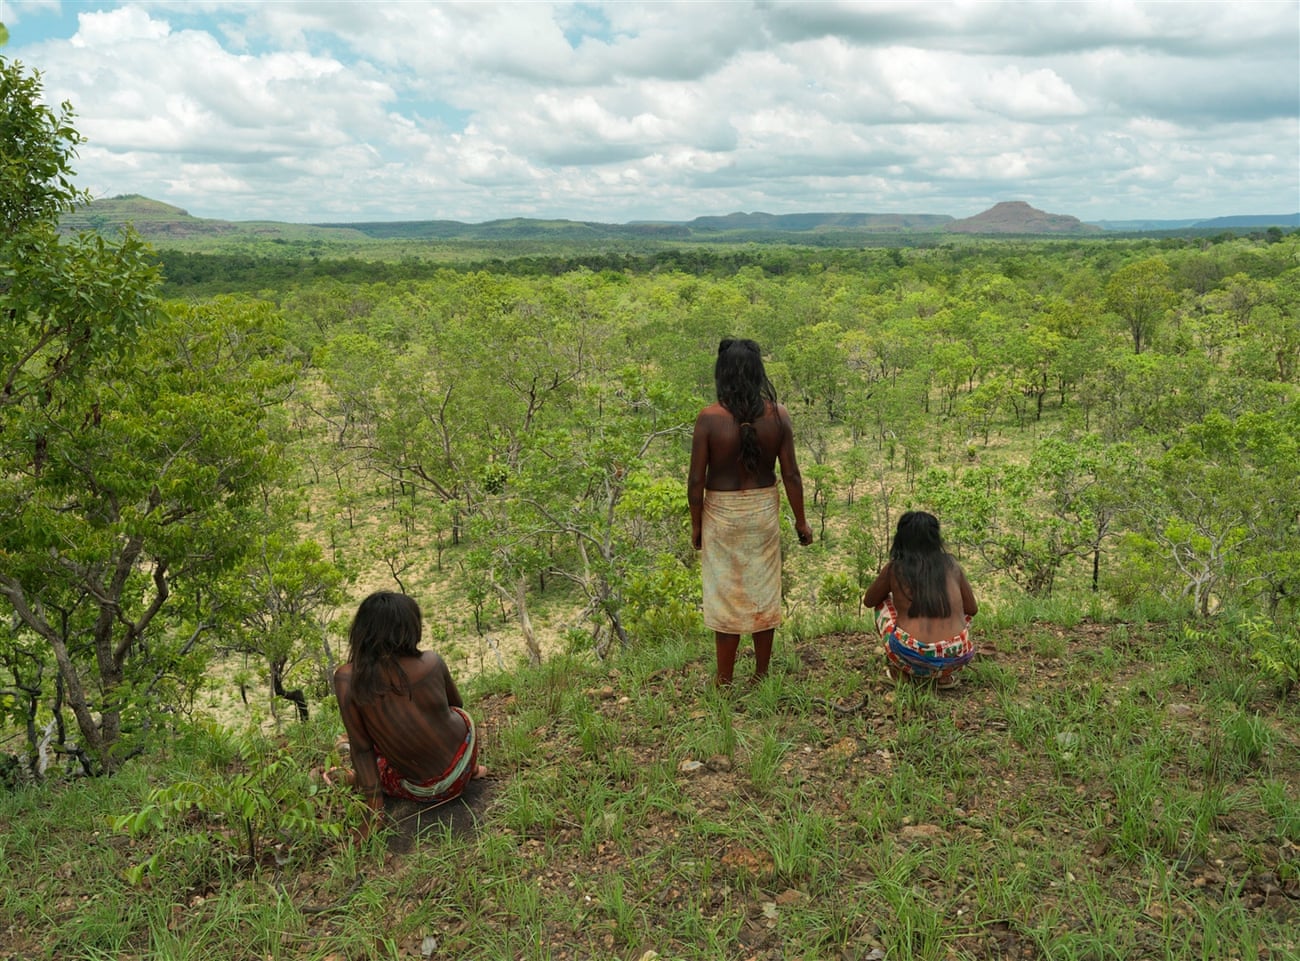 Approximately 300,000 hectares of the Cerrado is the protected territory of the Krahô people. The area is too large for complete surveillance and it is feared that remote portions are already being violated.